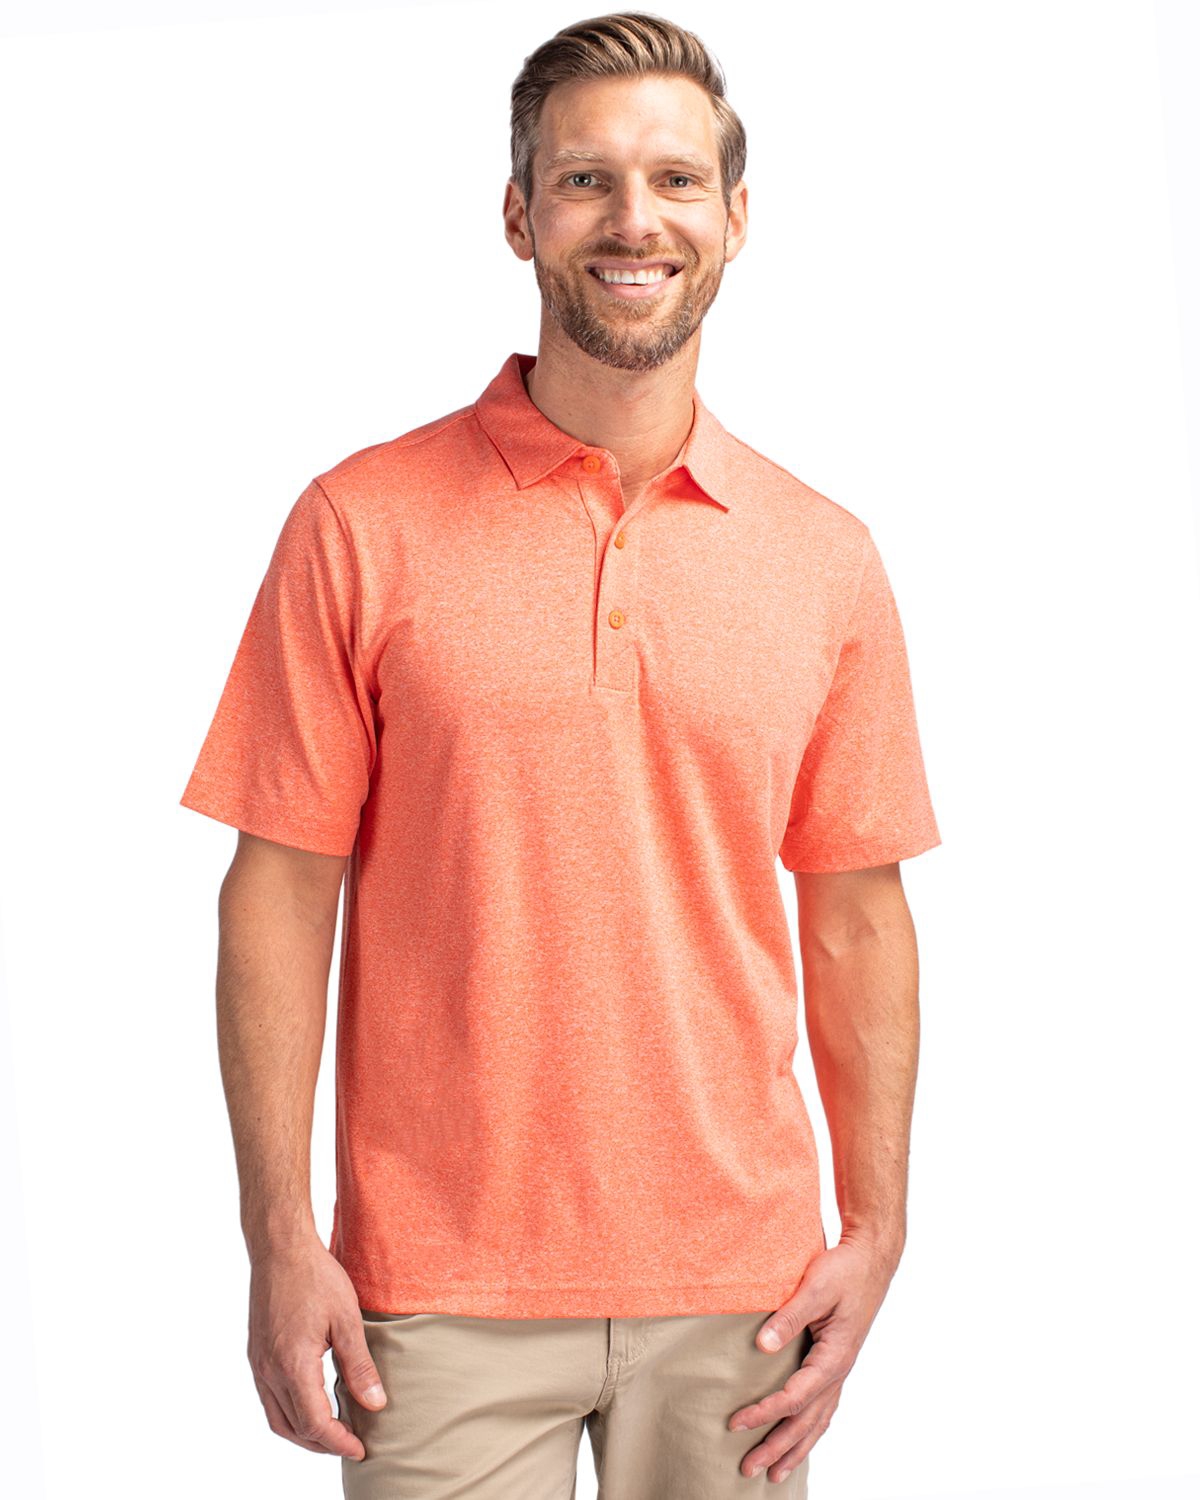 Men's Forge Heathered Stretch Polo Shirt - Hunter heather